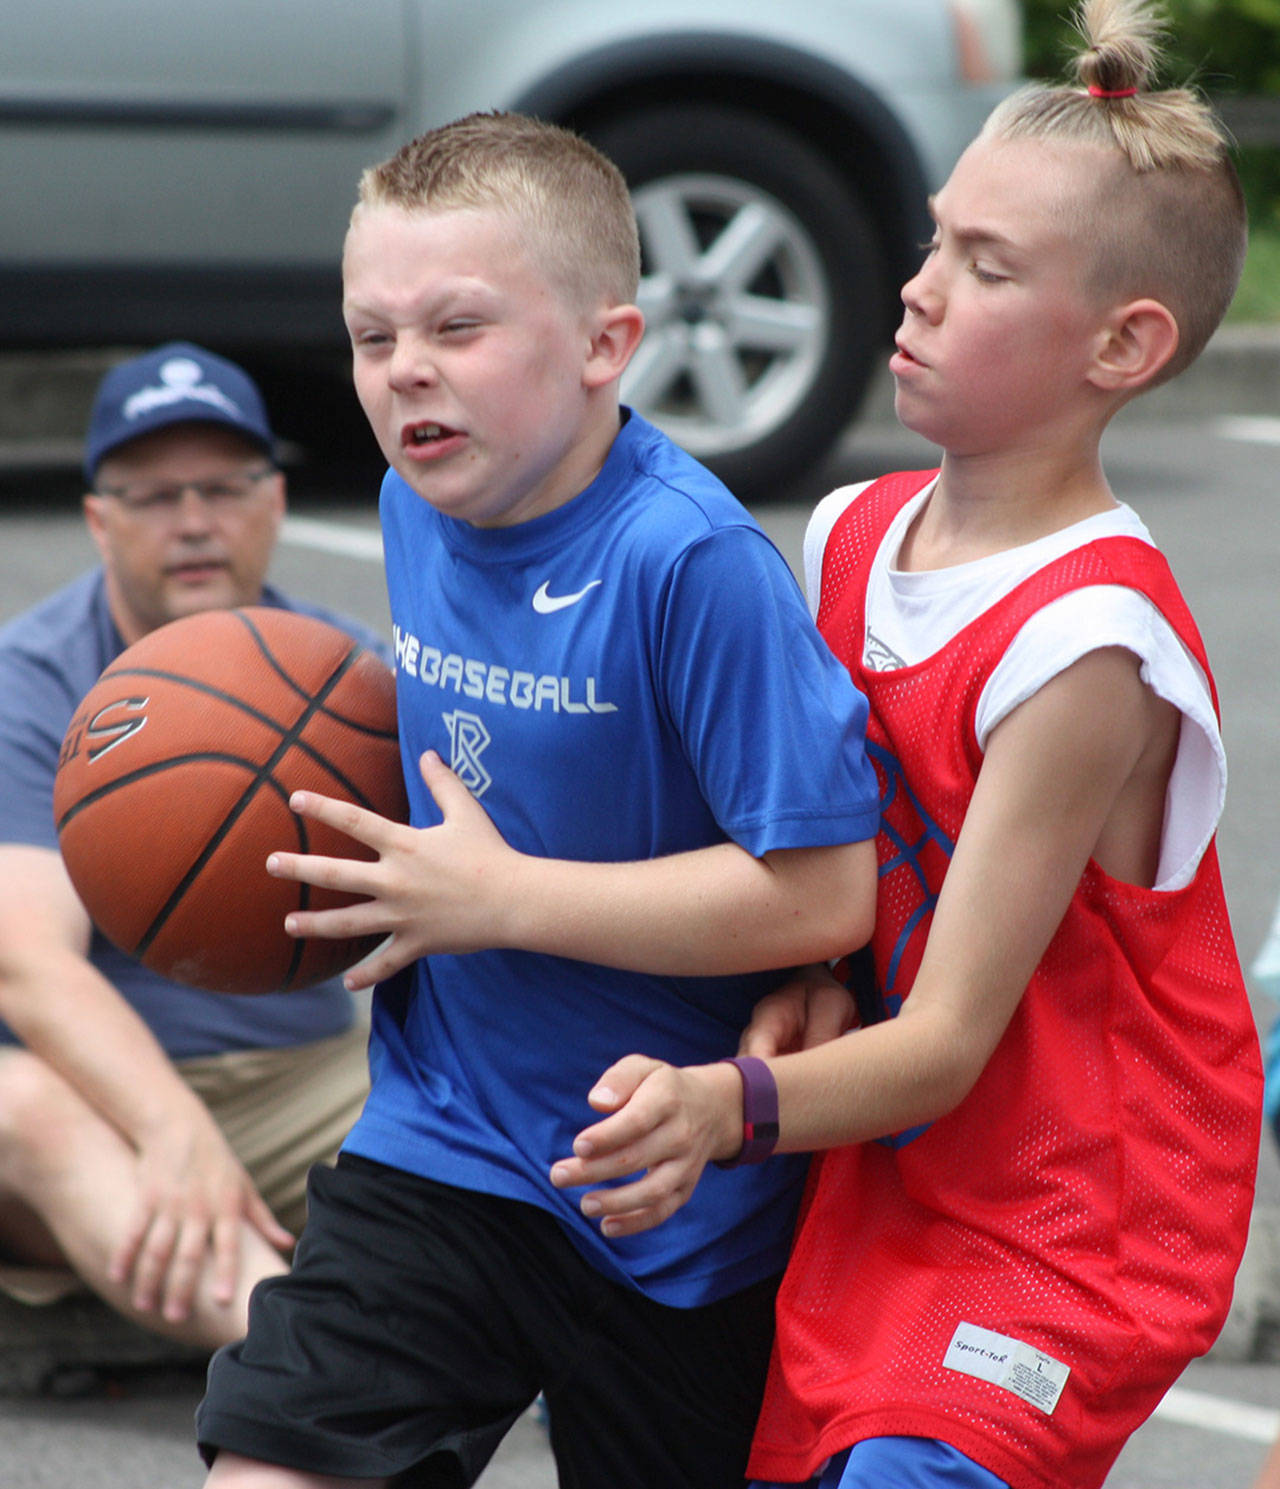 Jackson Whitaker of Liberty Blue drives on Grayson Frederick of the 26ers during fourth-grade boys division play during last year’s ShoWare Shootout. MARK KLAAS, Kent Reporter